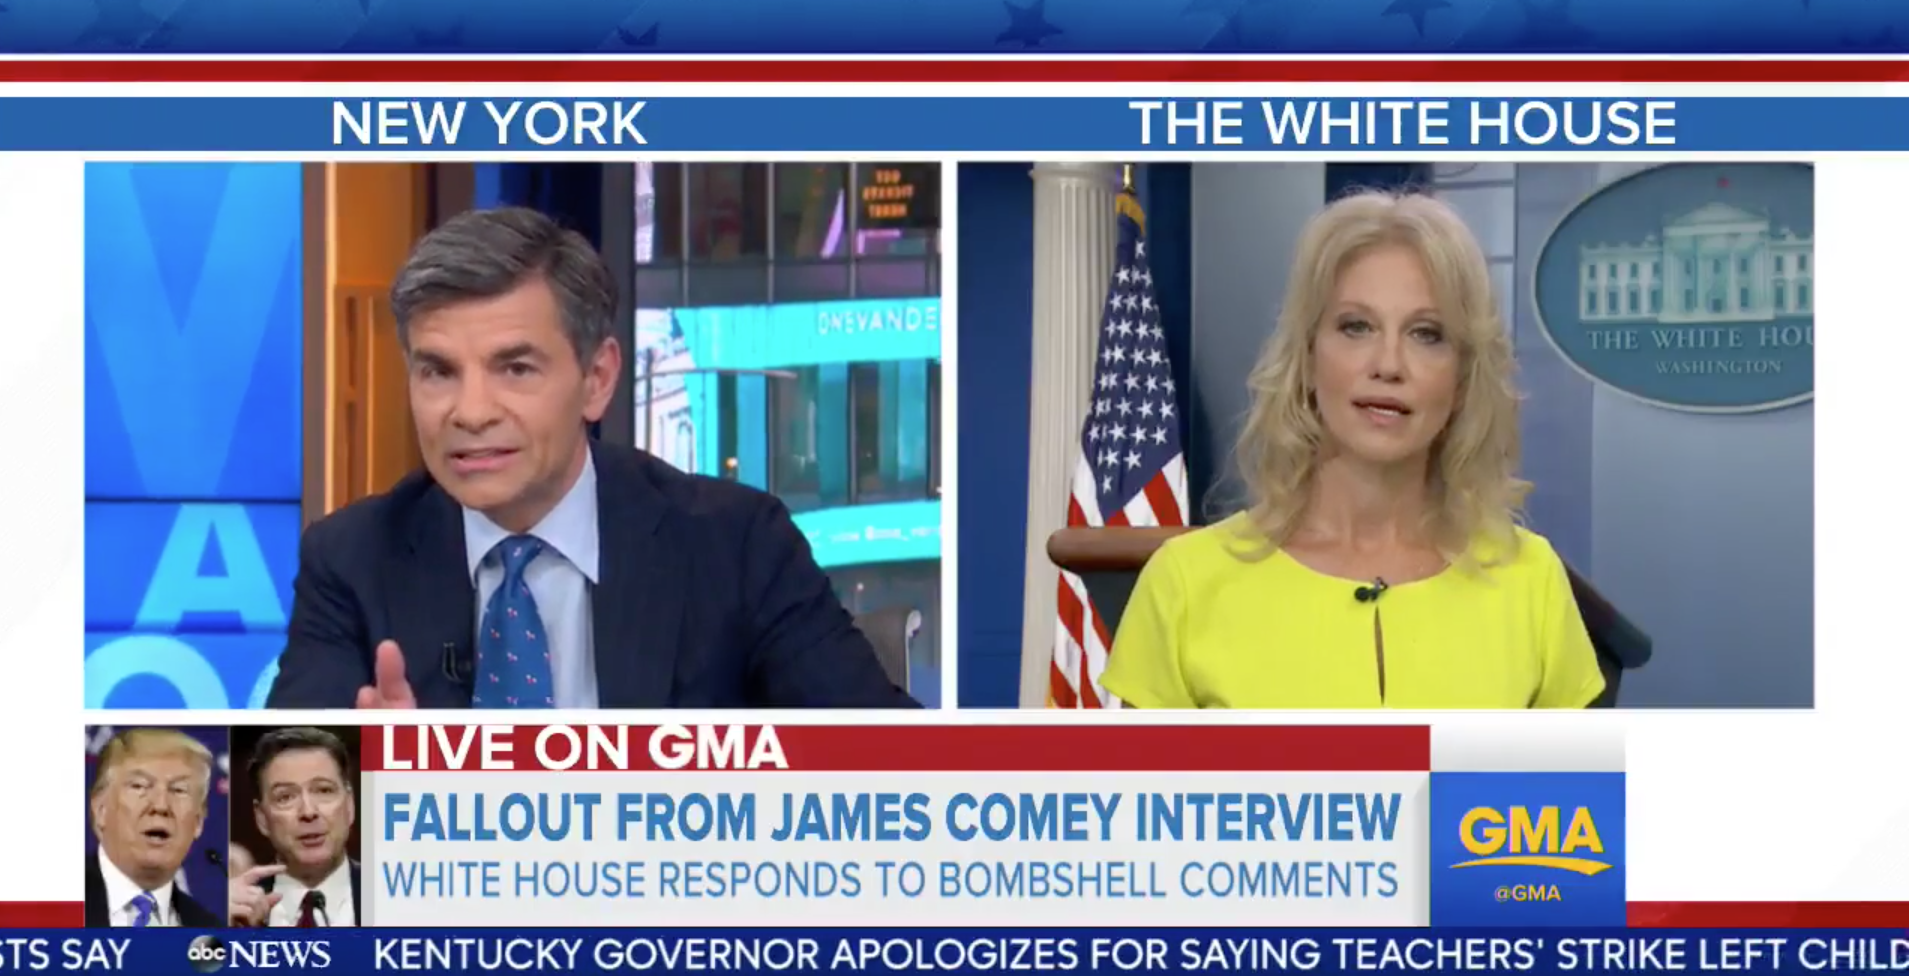 George Stephanopoulos challenges Kellyanne Conway on Comey.